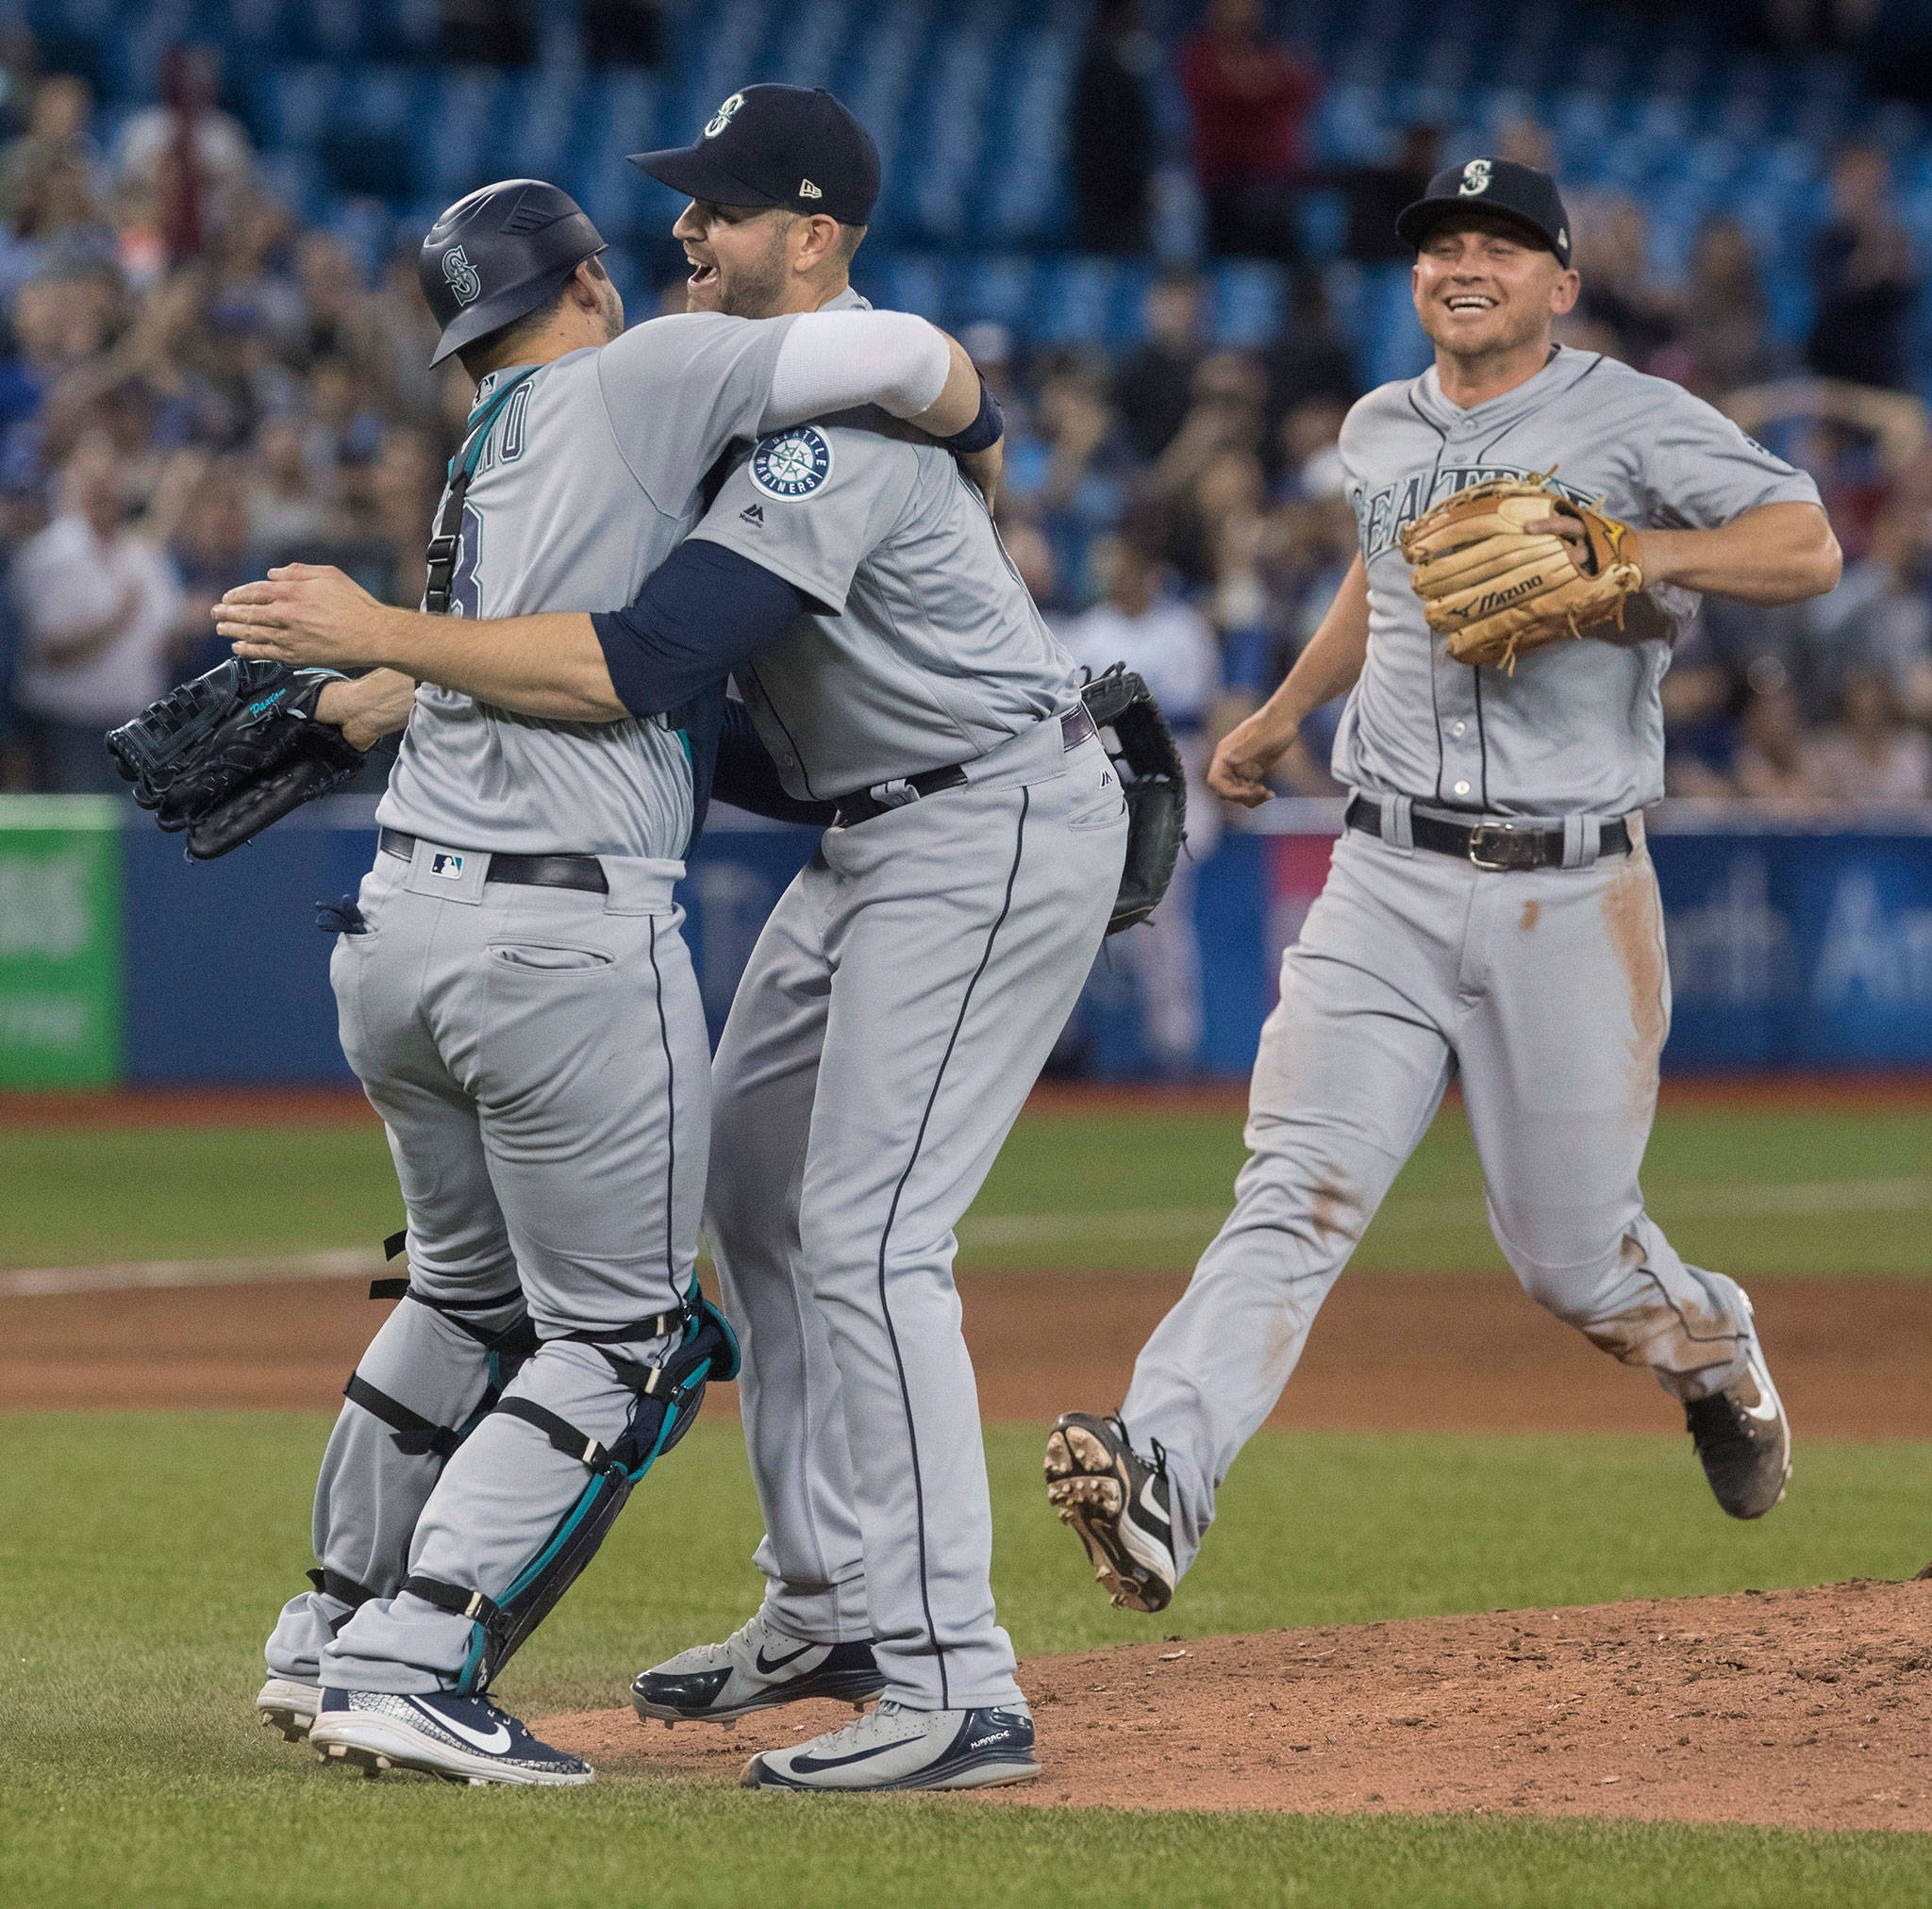 Mariners starting pitcher James Paxton (center) celebrates with teammates after throwing a no-hitter against the Blue Jays on May 8, 2018, in Toronto. (Fred Thornhill/The Canadian Press via AP)